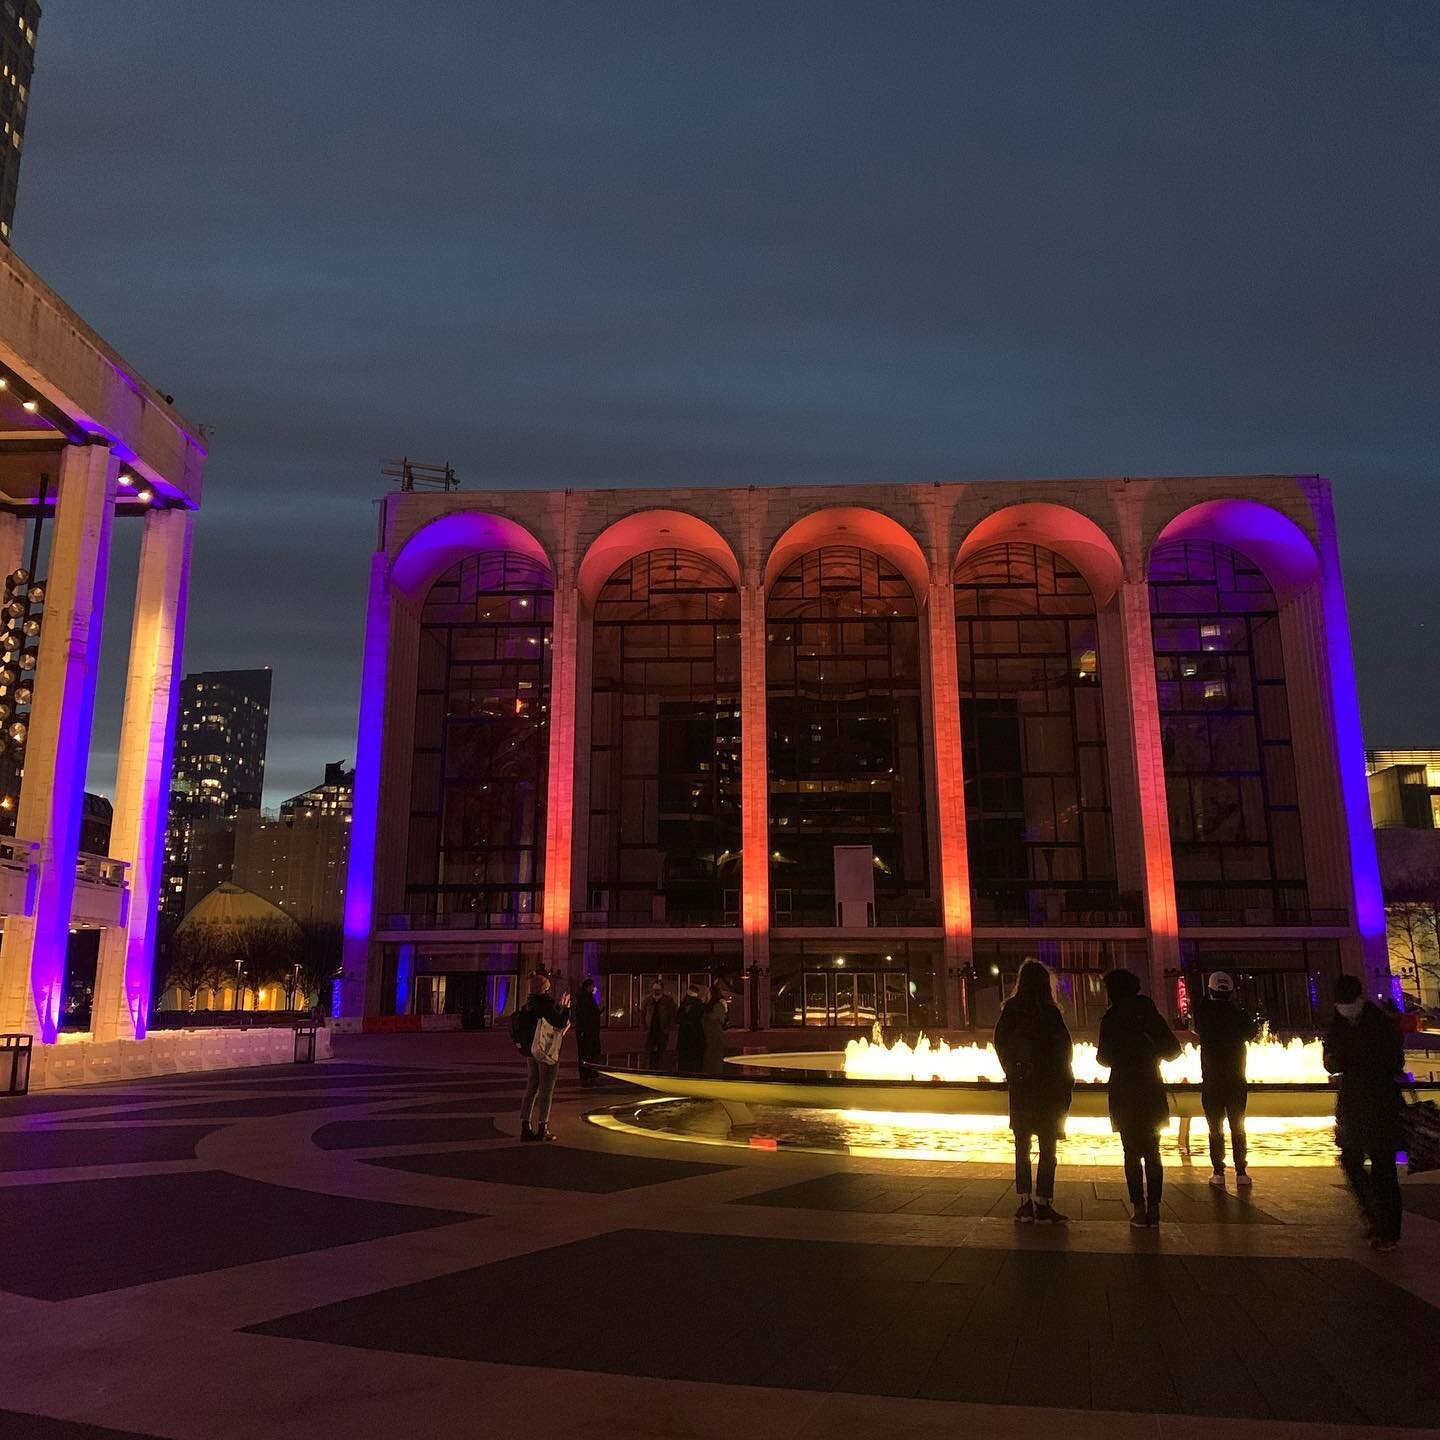 from the other weekend. cheers to Friday ☺️

#newyork #nyc #ny #lincolncenter #art #sculpture #architecture #colors #metopera is the #beautiful building there with the arches. I used to sit in this area to work on stuff, paint or have Whole Foods to-